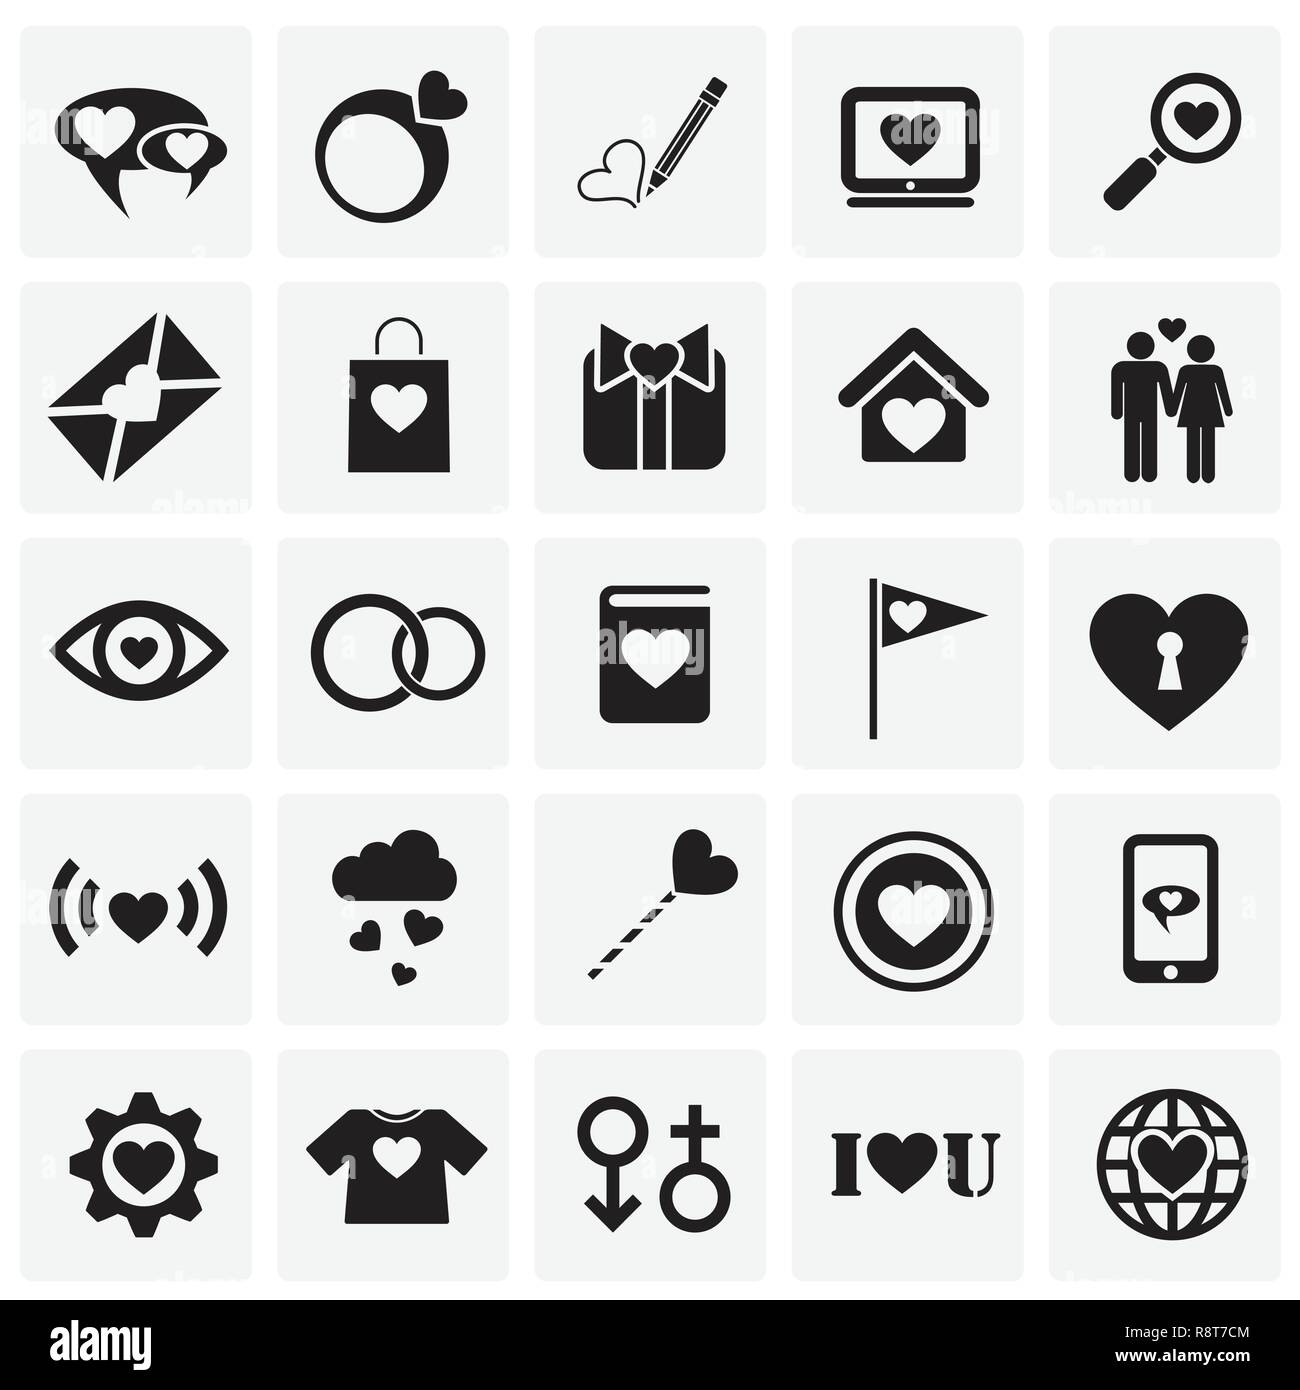 Valentines day icons set on squares background for graphic and web design, Modern simple vector sign. Internet concept. Trendy symbol for website design web button or mobile app. Stock Vector